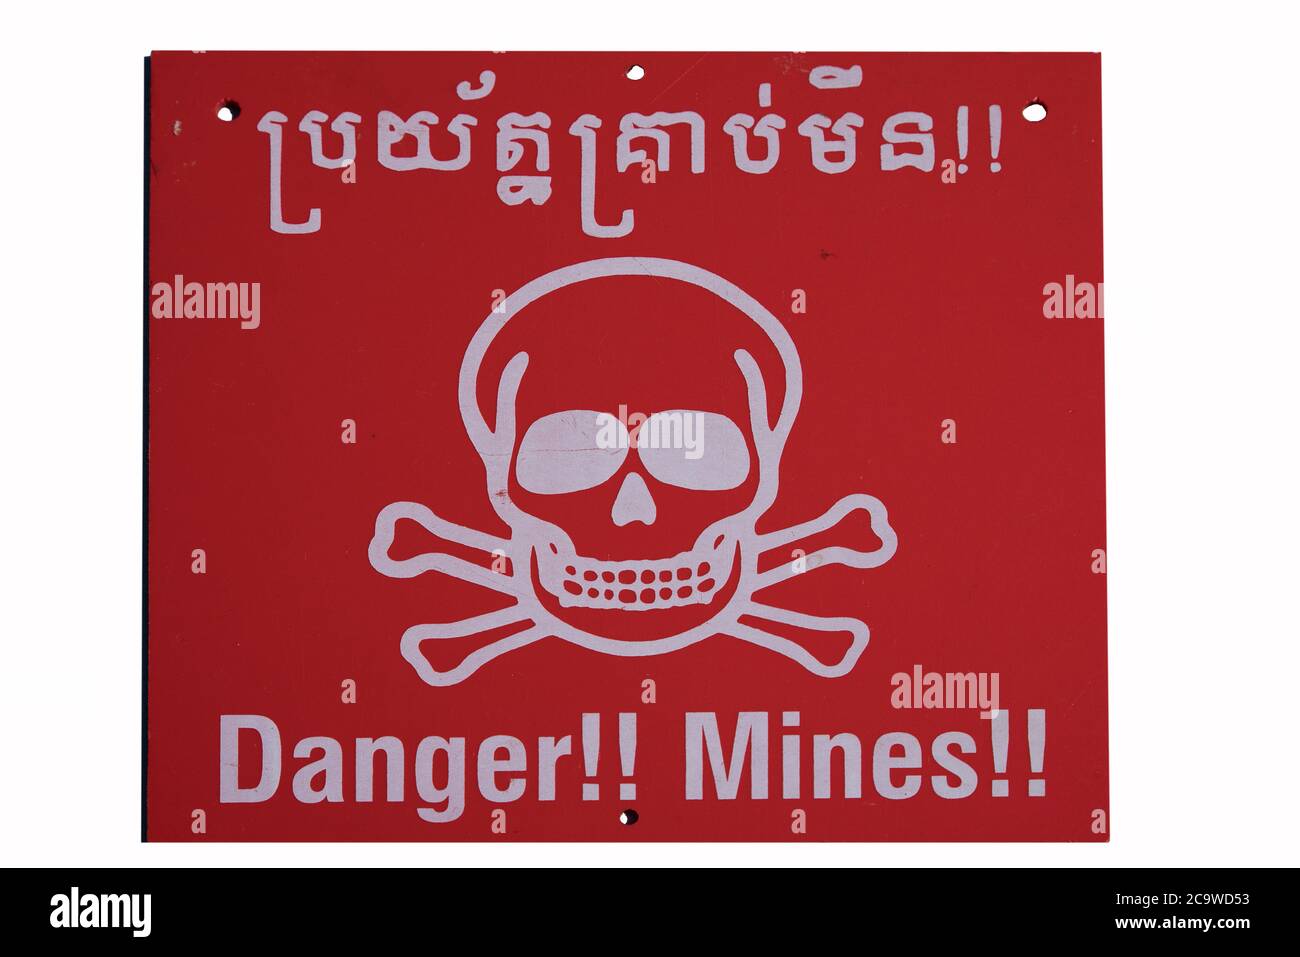 Warning sign from a minefield Stock Photo